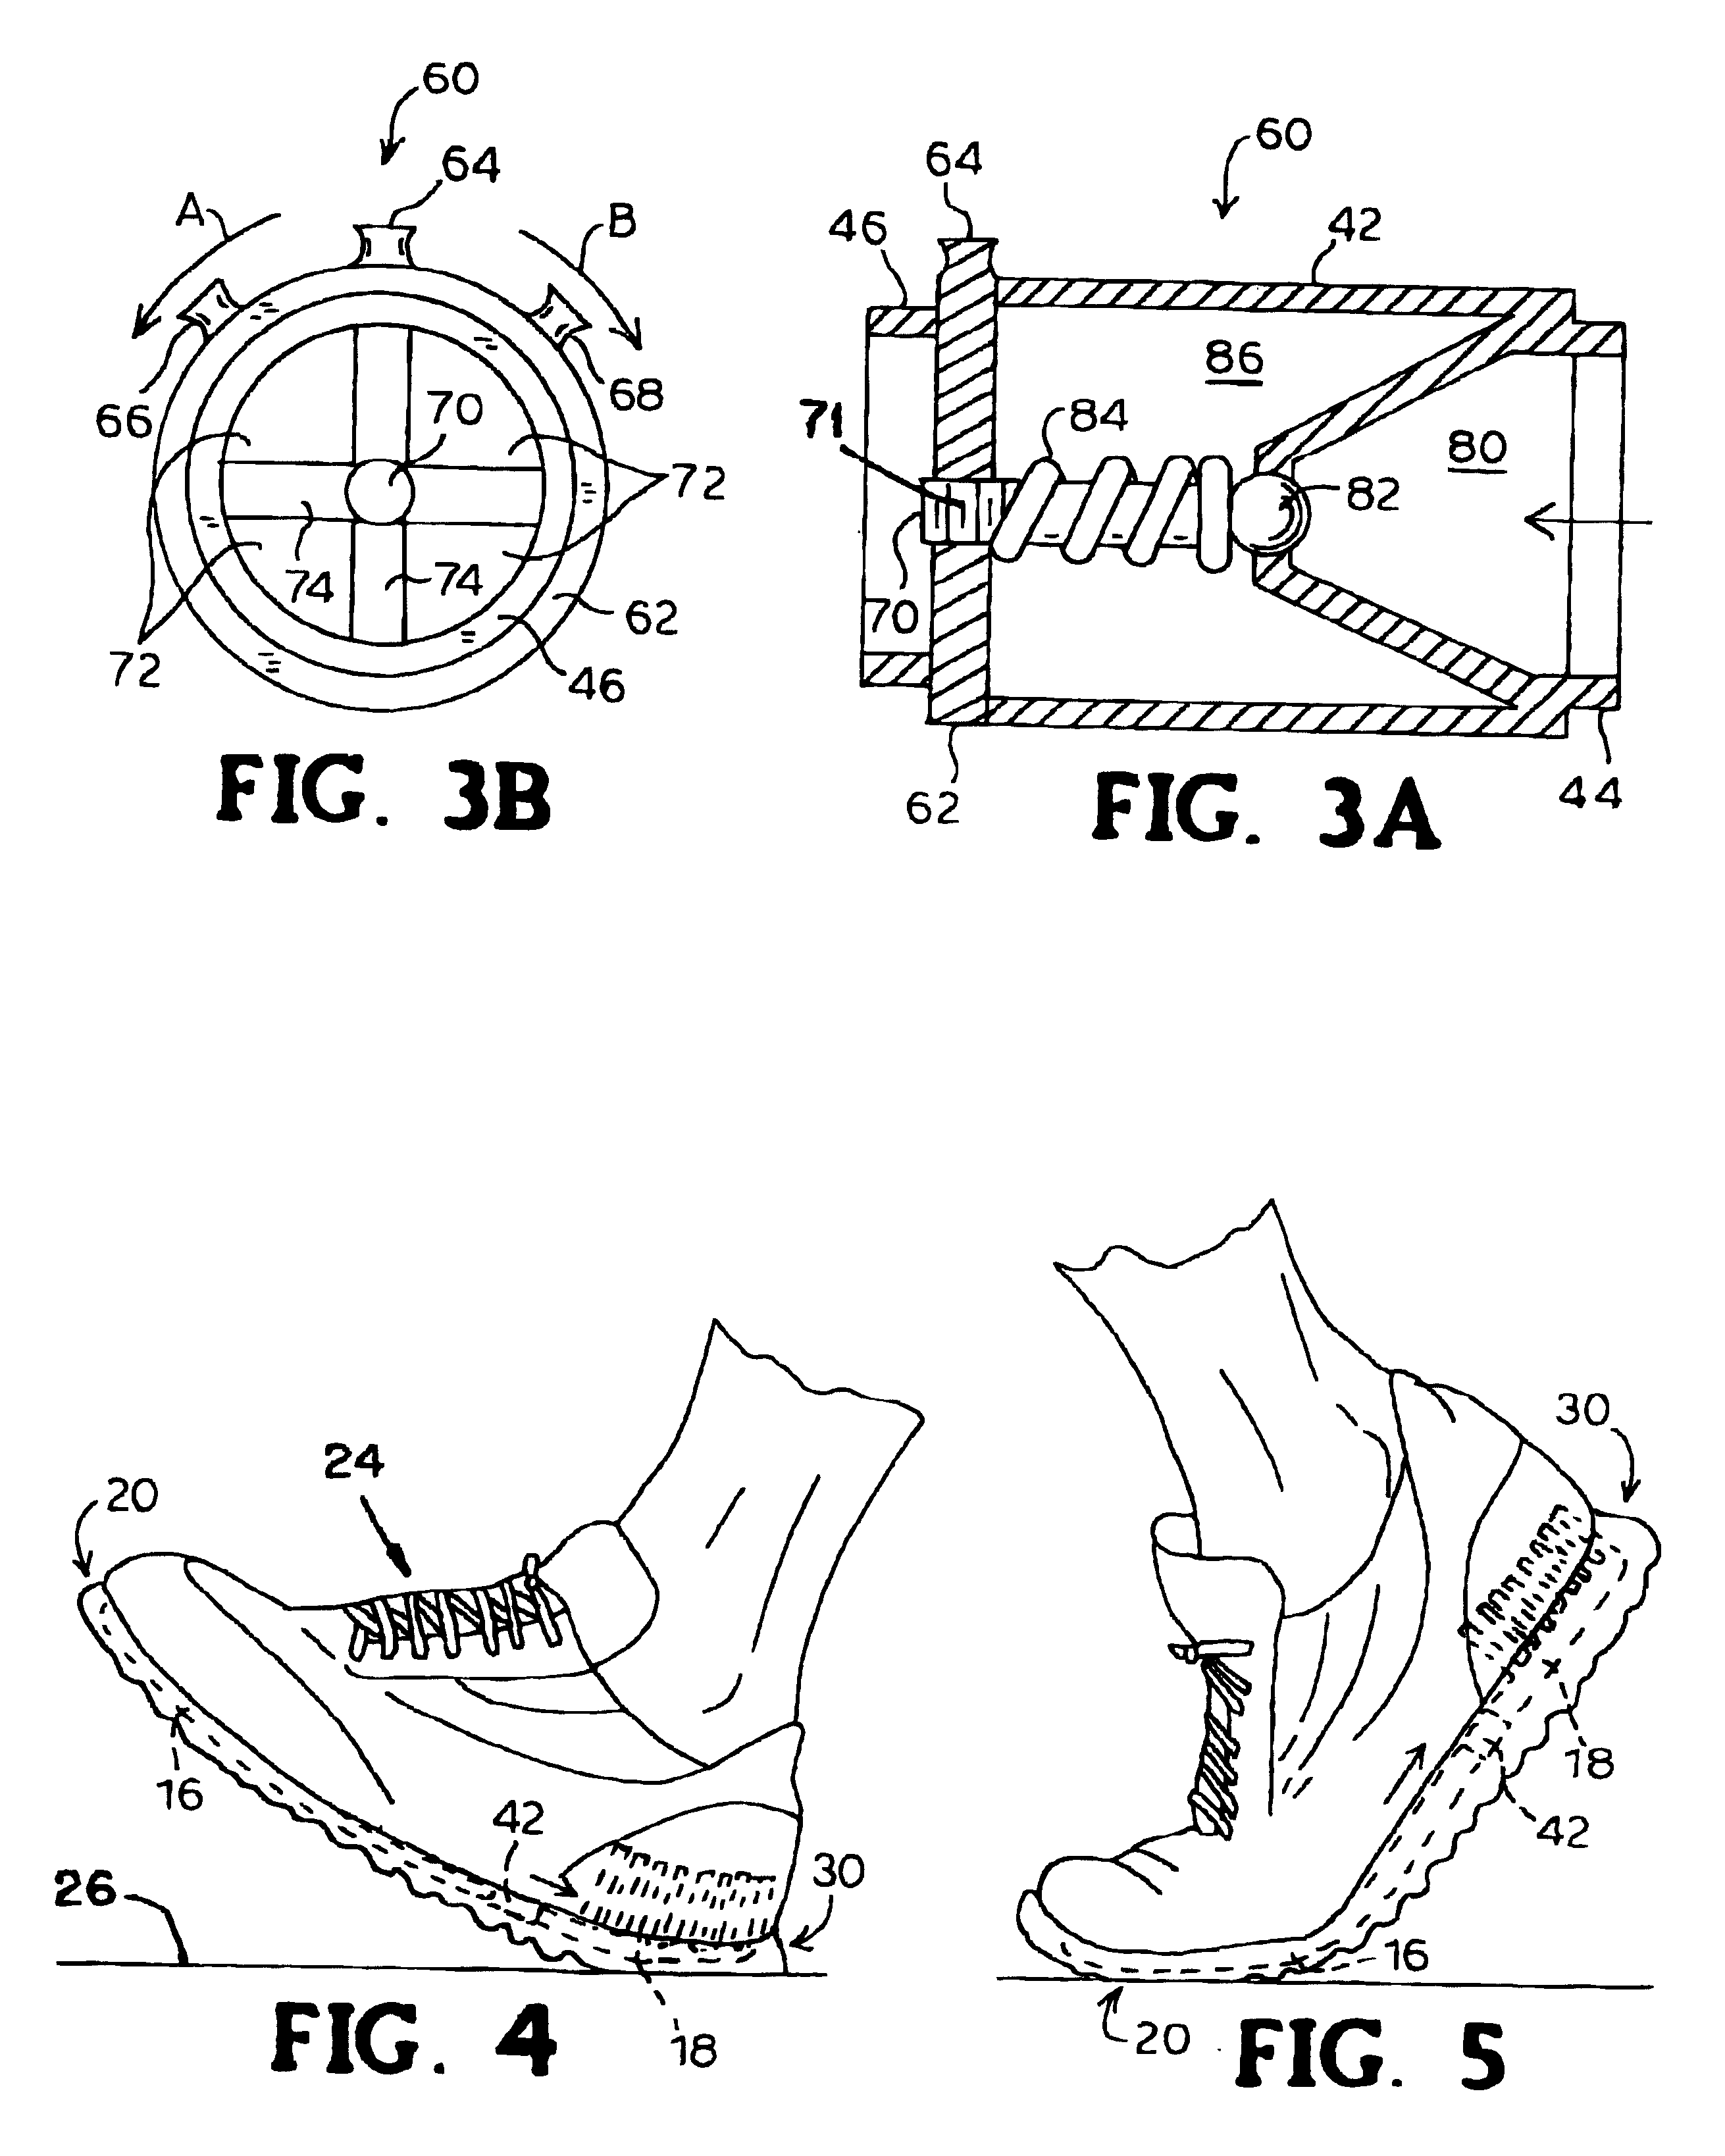 Method of controlling fluid flow transfer in shoes